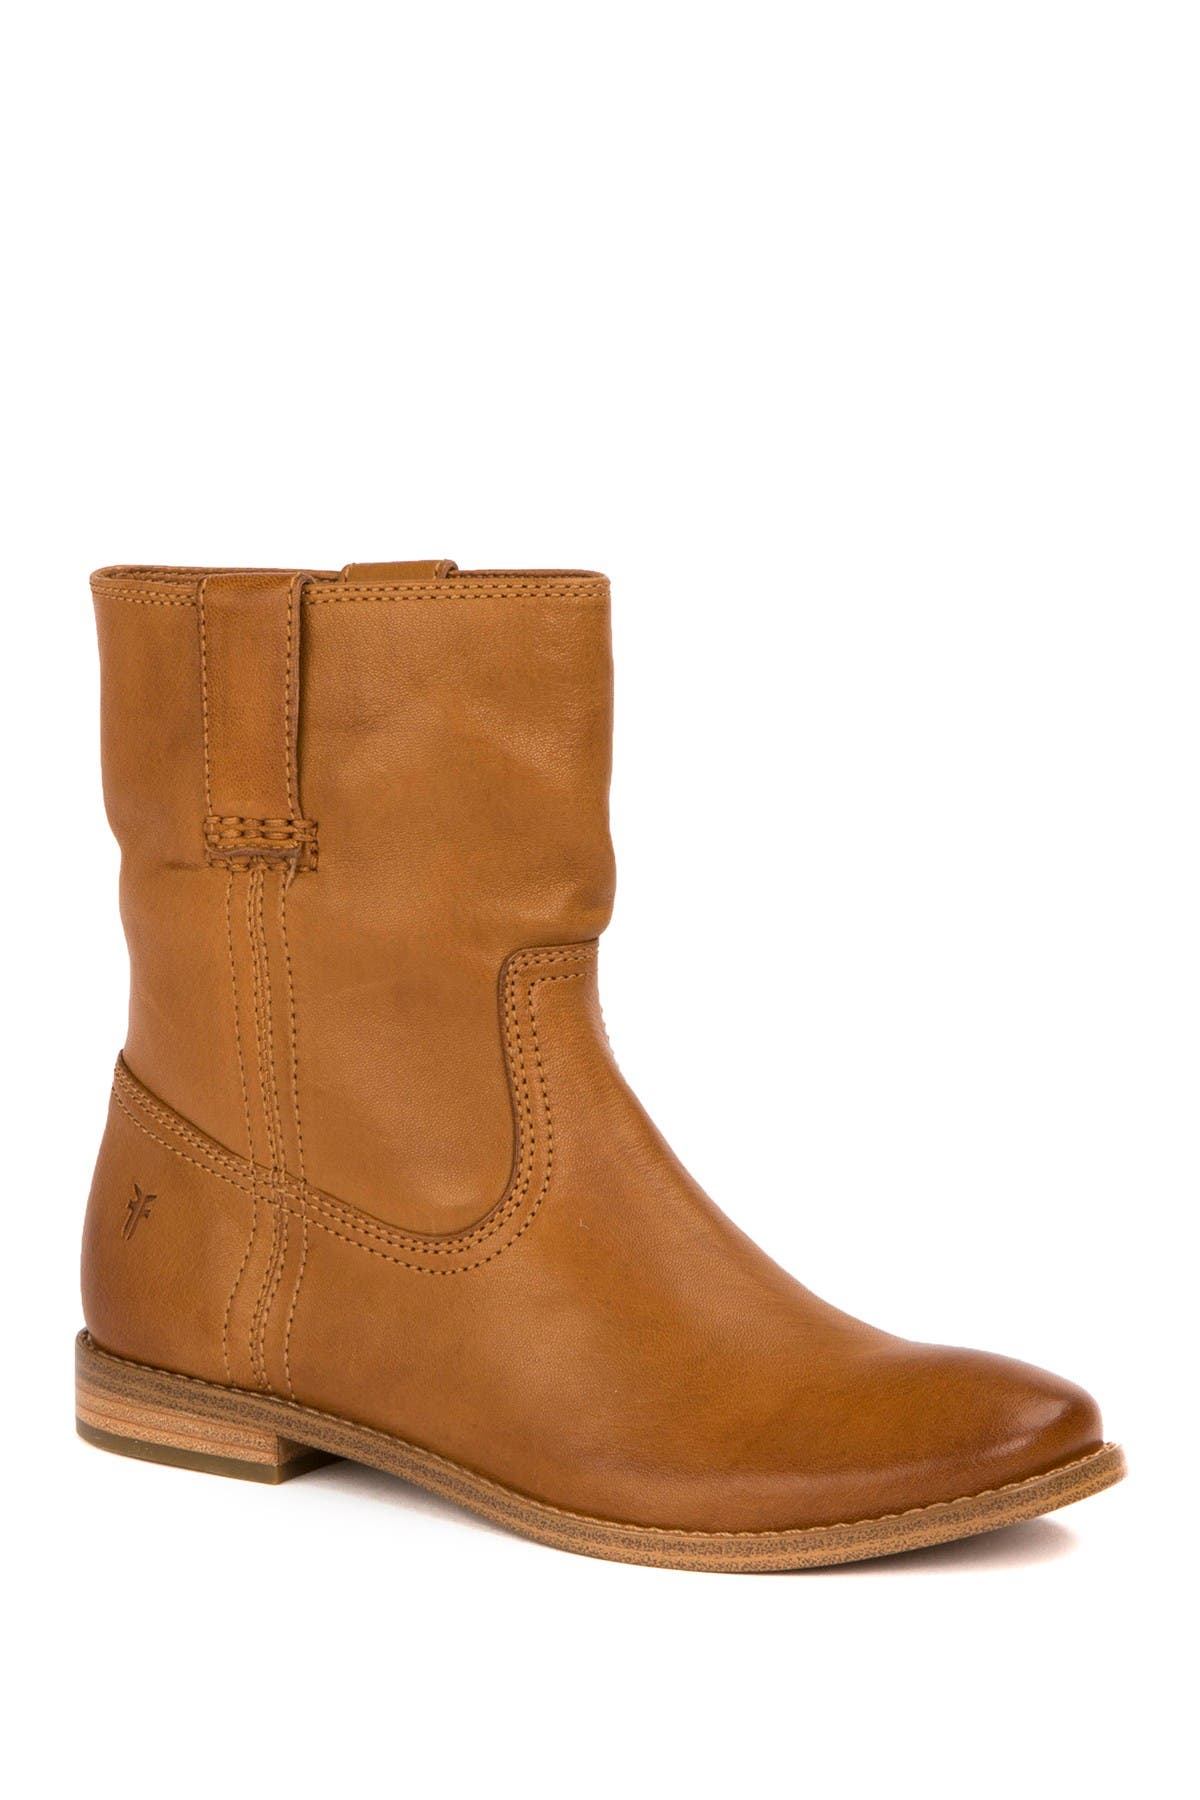 Frye | Anna Leather Short Boot 